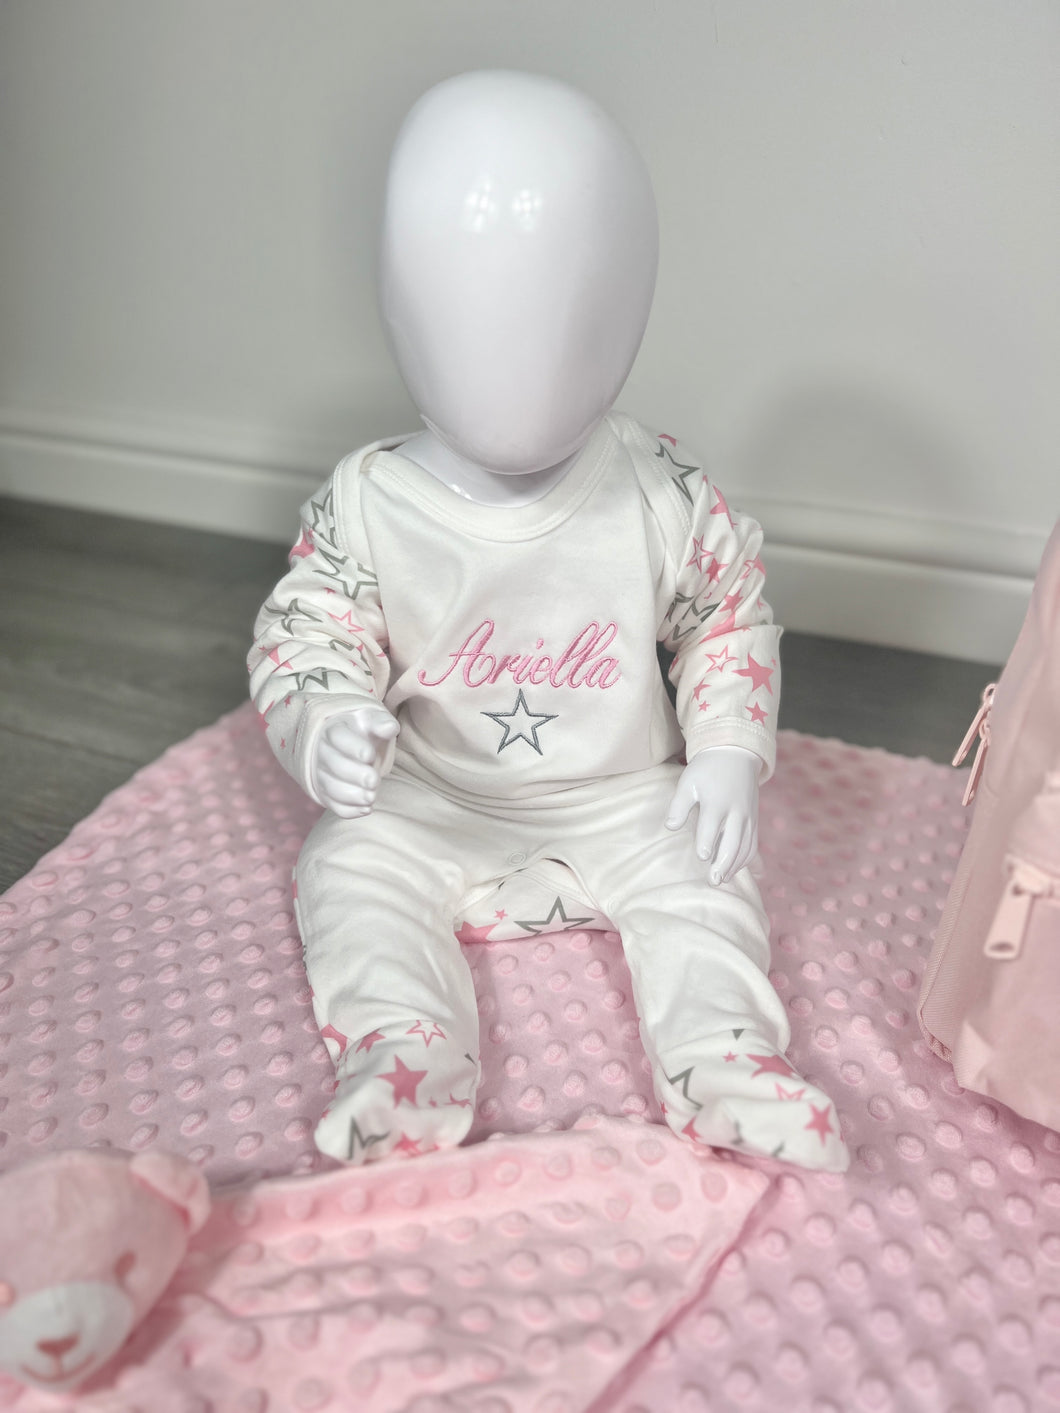 Personalised Children's/Baby Embroidered Babygrow/Sleepsuit